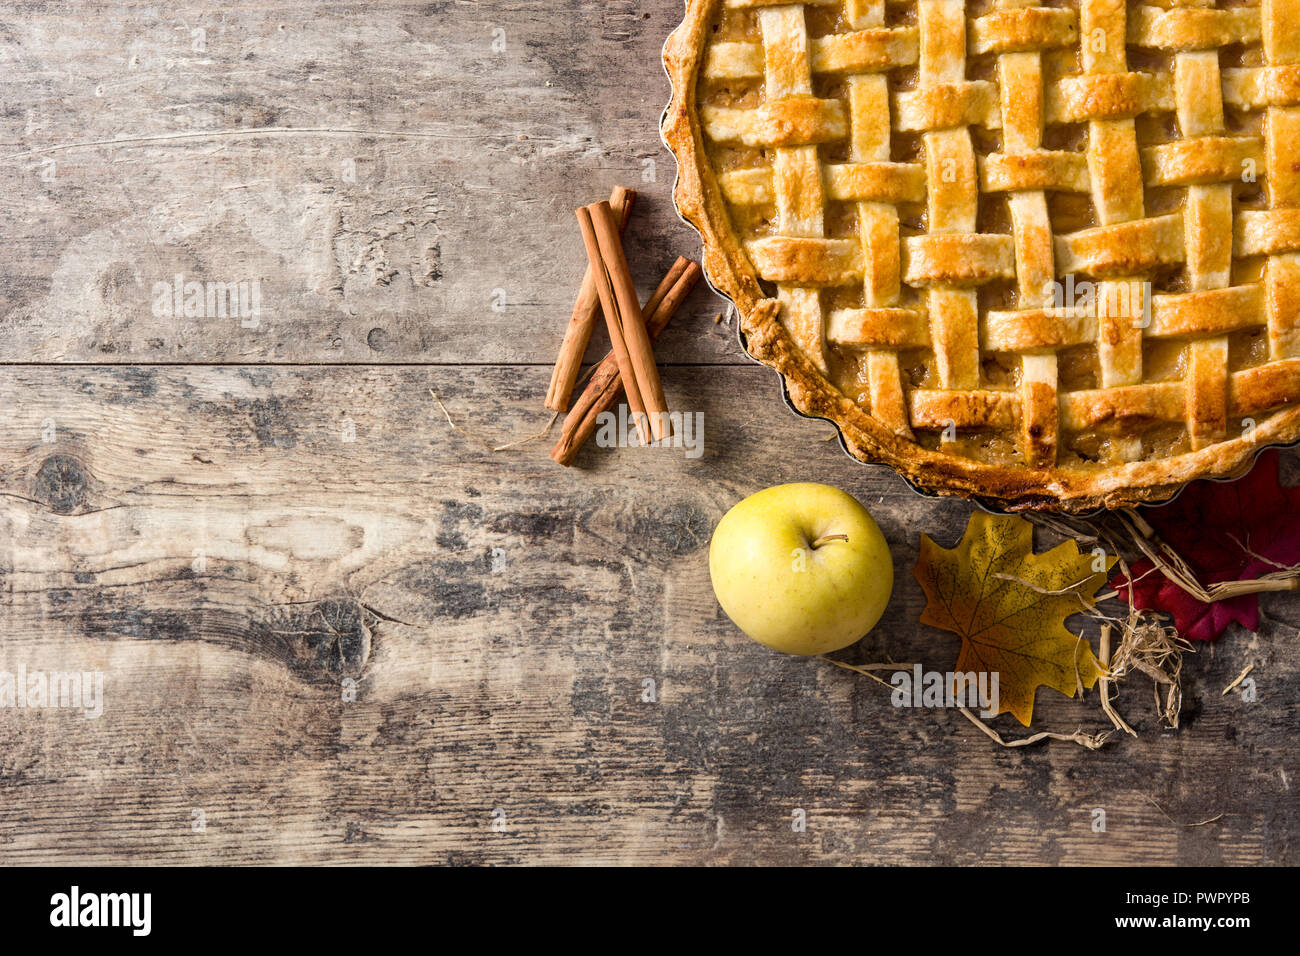 Homemade traditional apple pie on wooden table. Top view. Copyspace Stock Photo